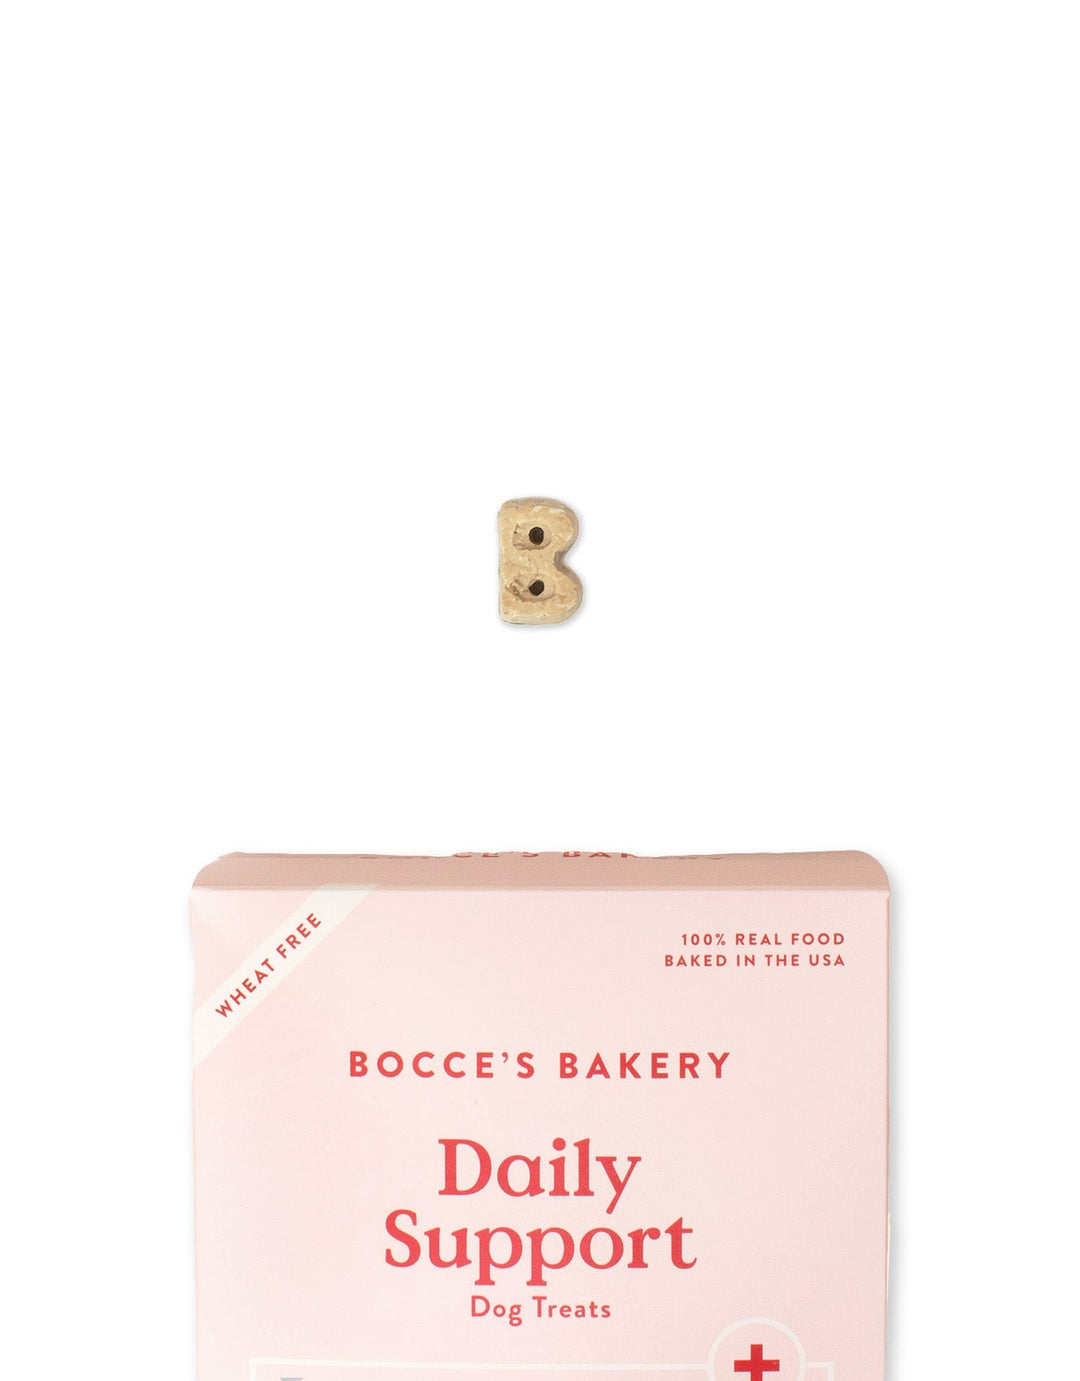 Bocce's Bakery - Daily Support - Belly Pumpkin & Ginger Dog Treats